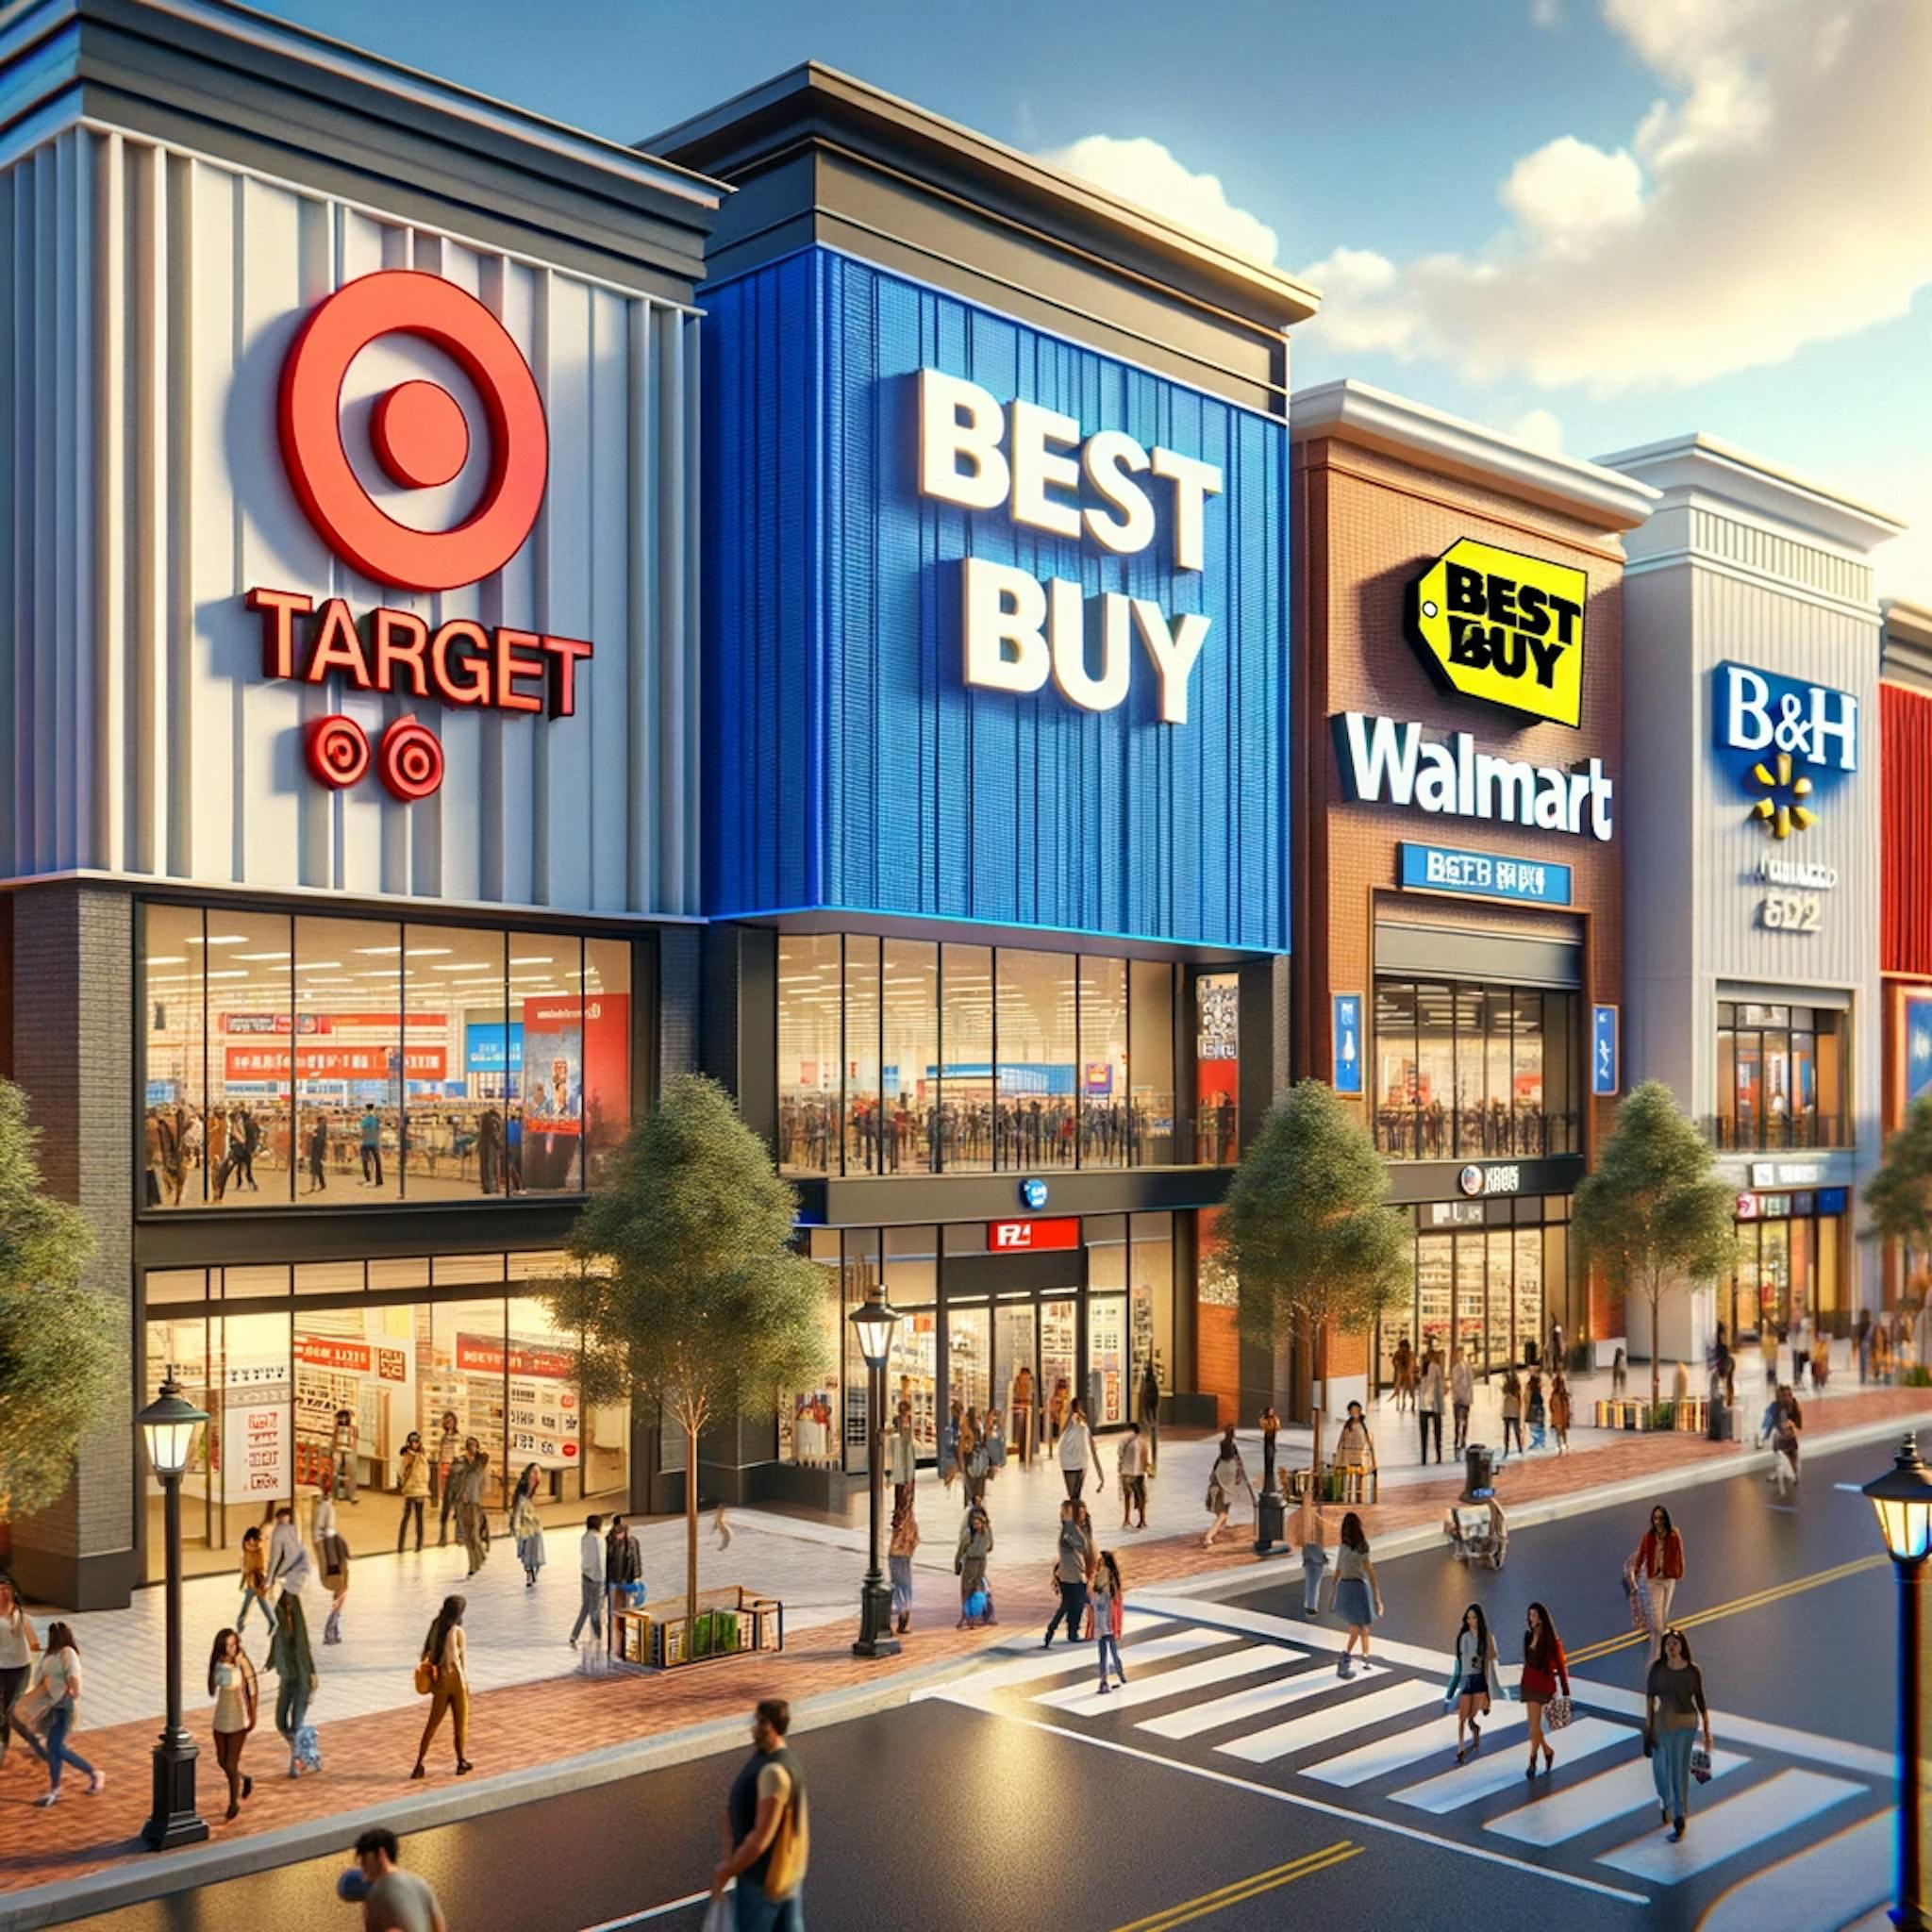 modern shopping district with major retailers Target, Best Buy, Walmart, and B&H Photo